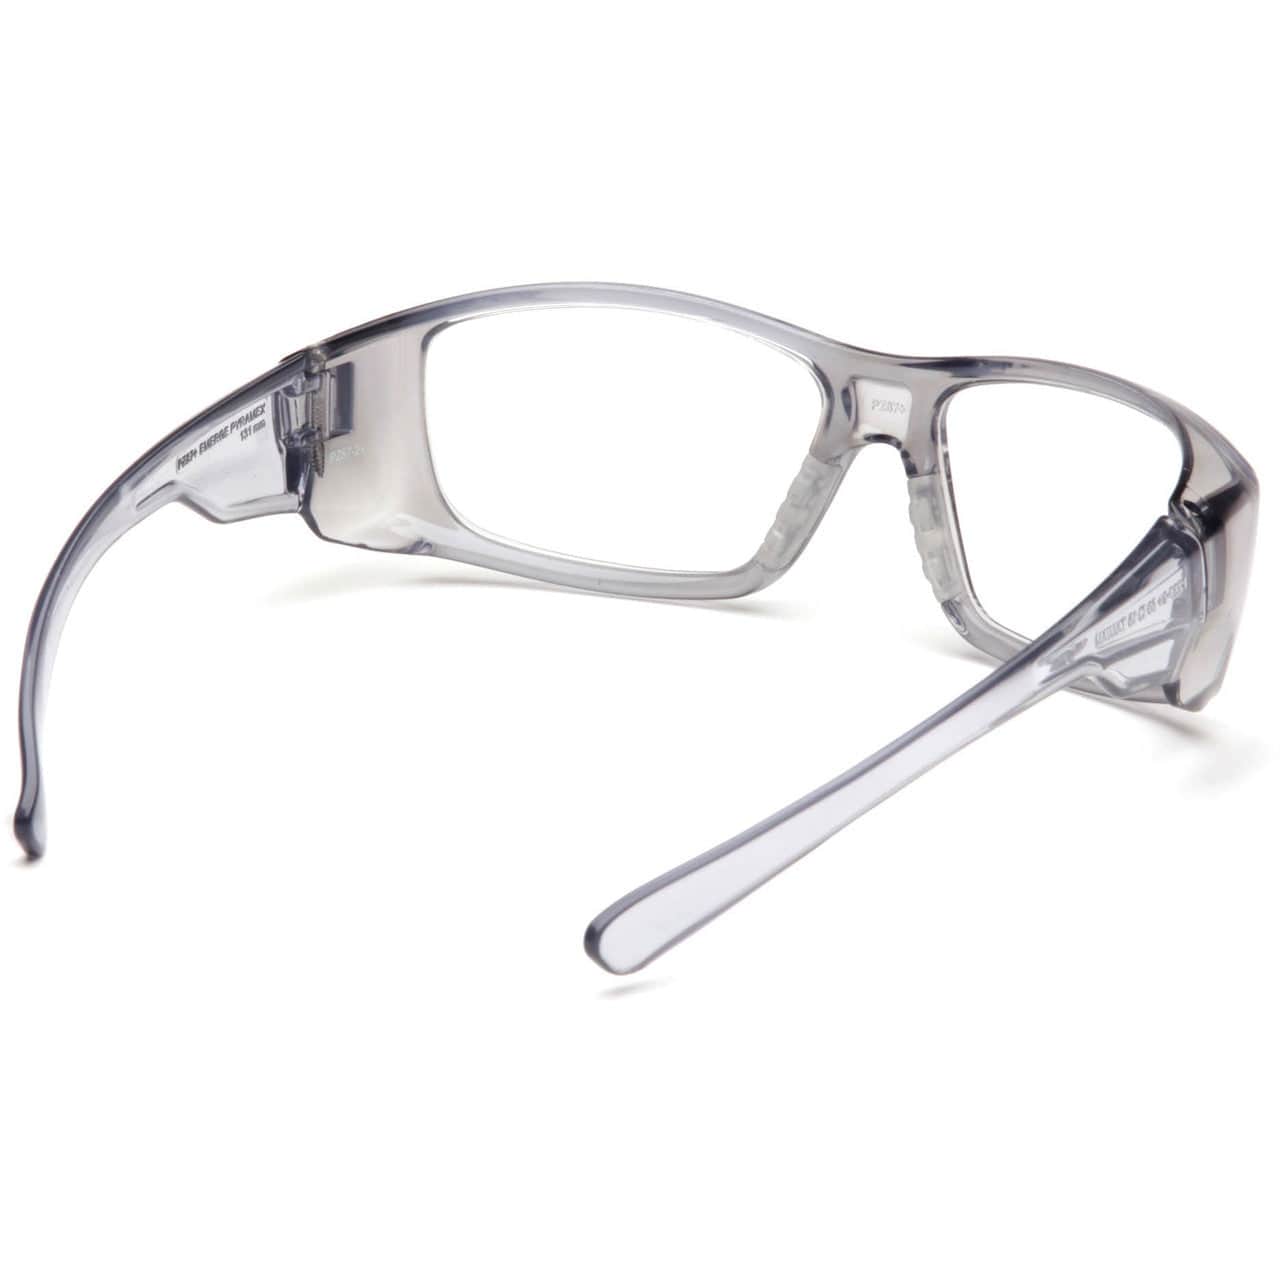 Pyramex SG7910DRX Emerge Safety Glasses Gray Frame Clear Lens Inside View